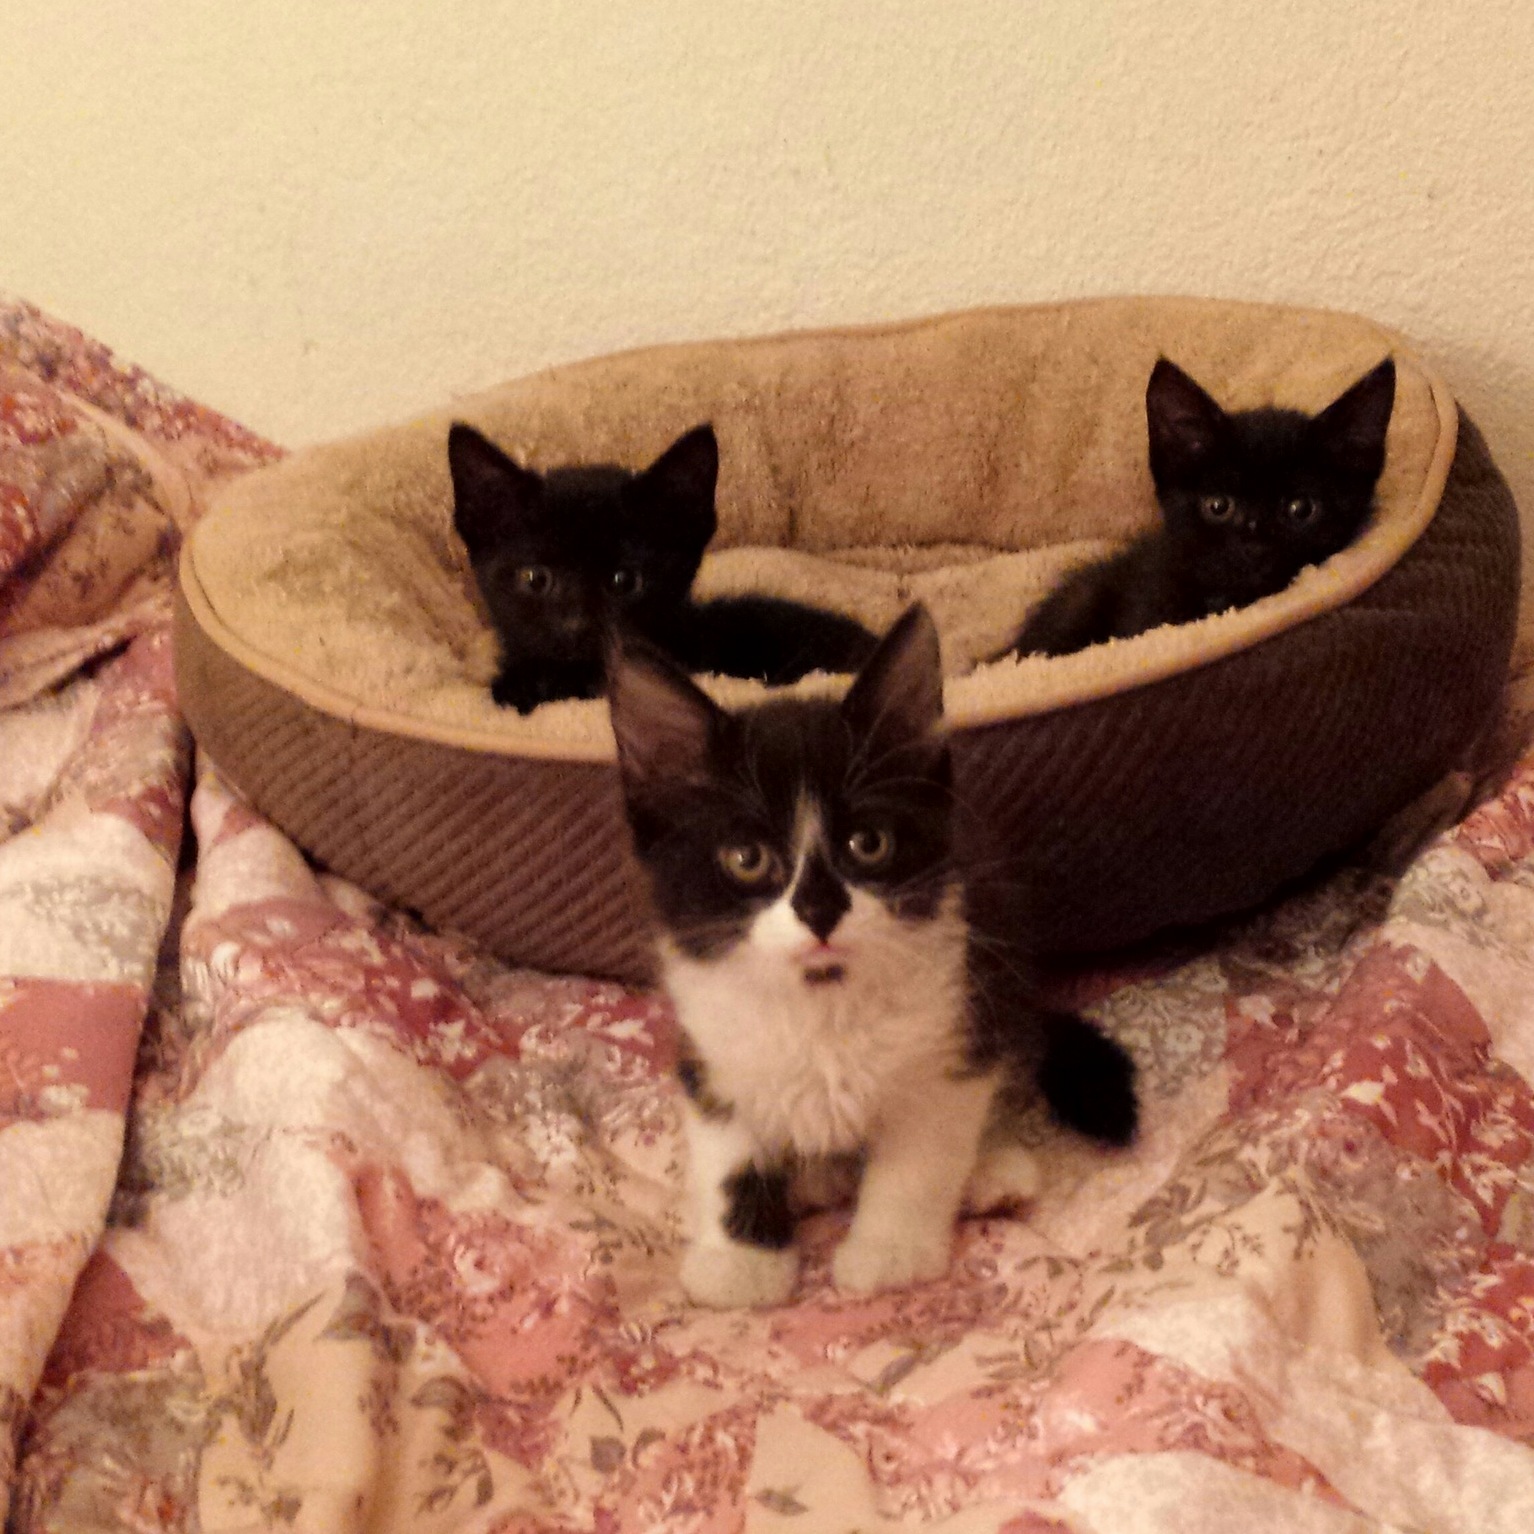 My latest foster babies x post from rkittens